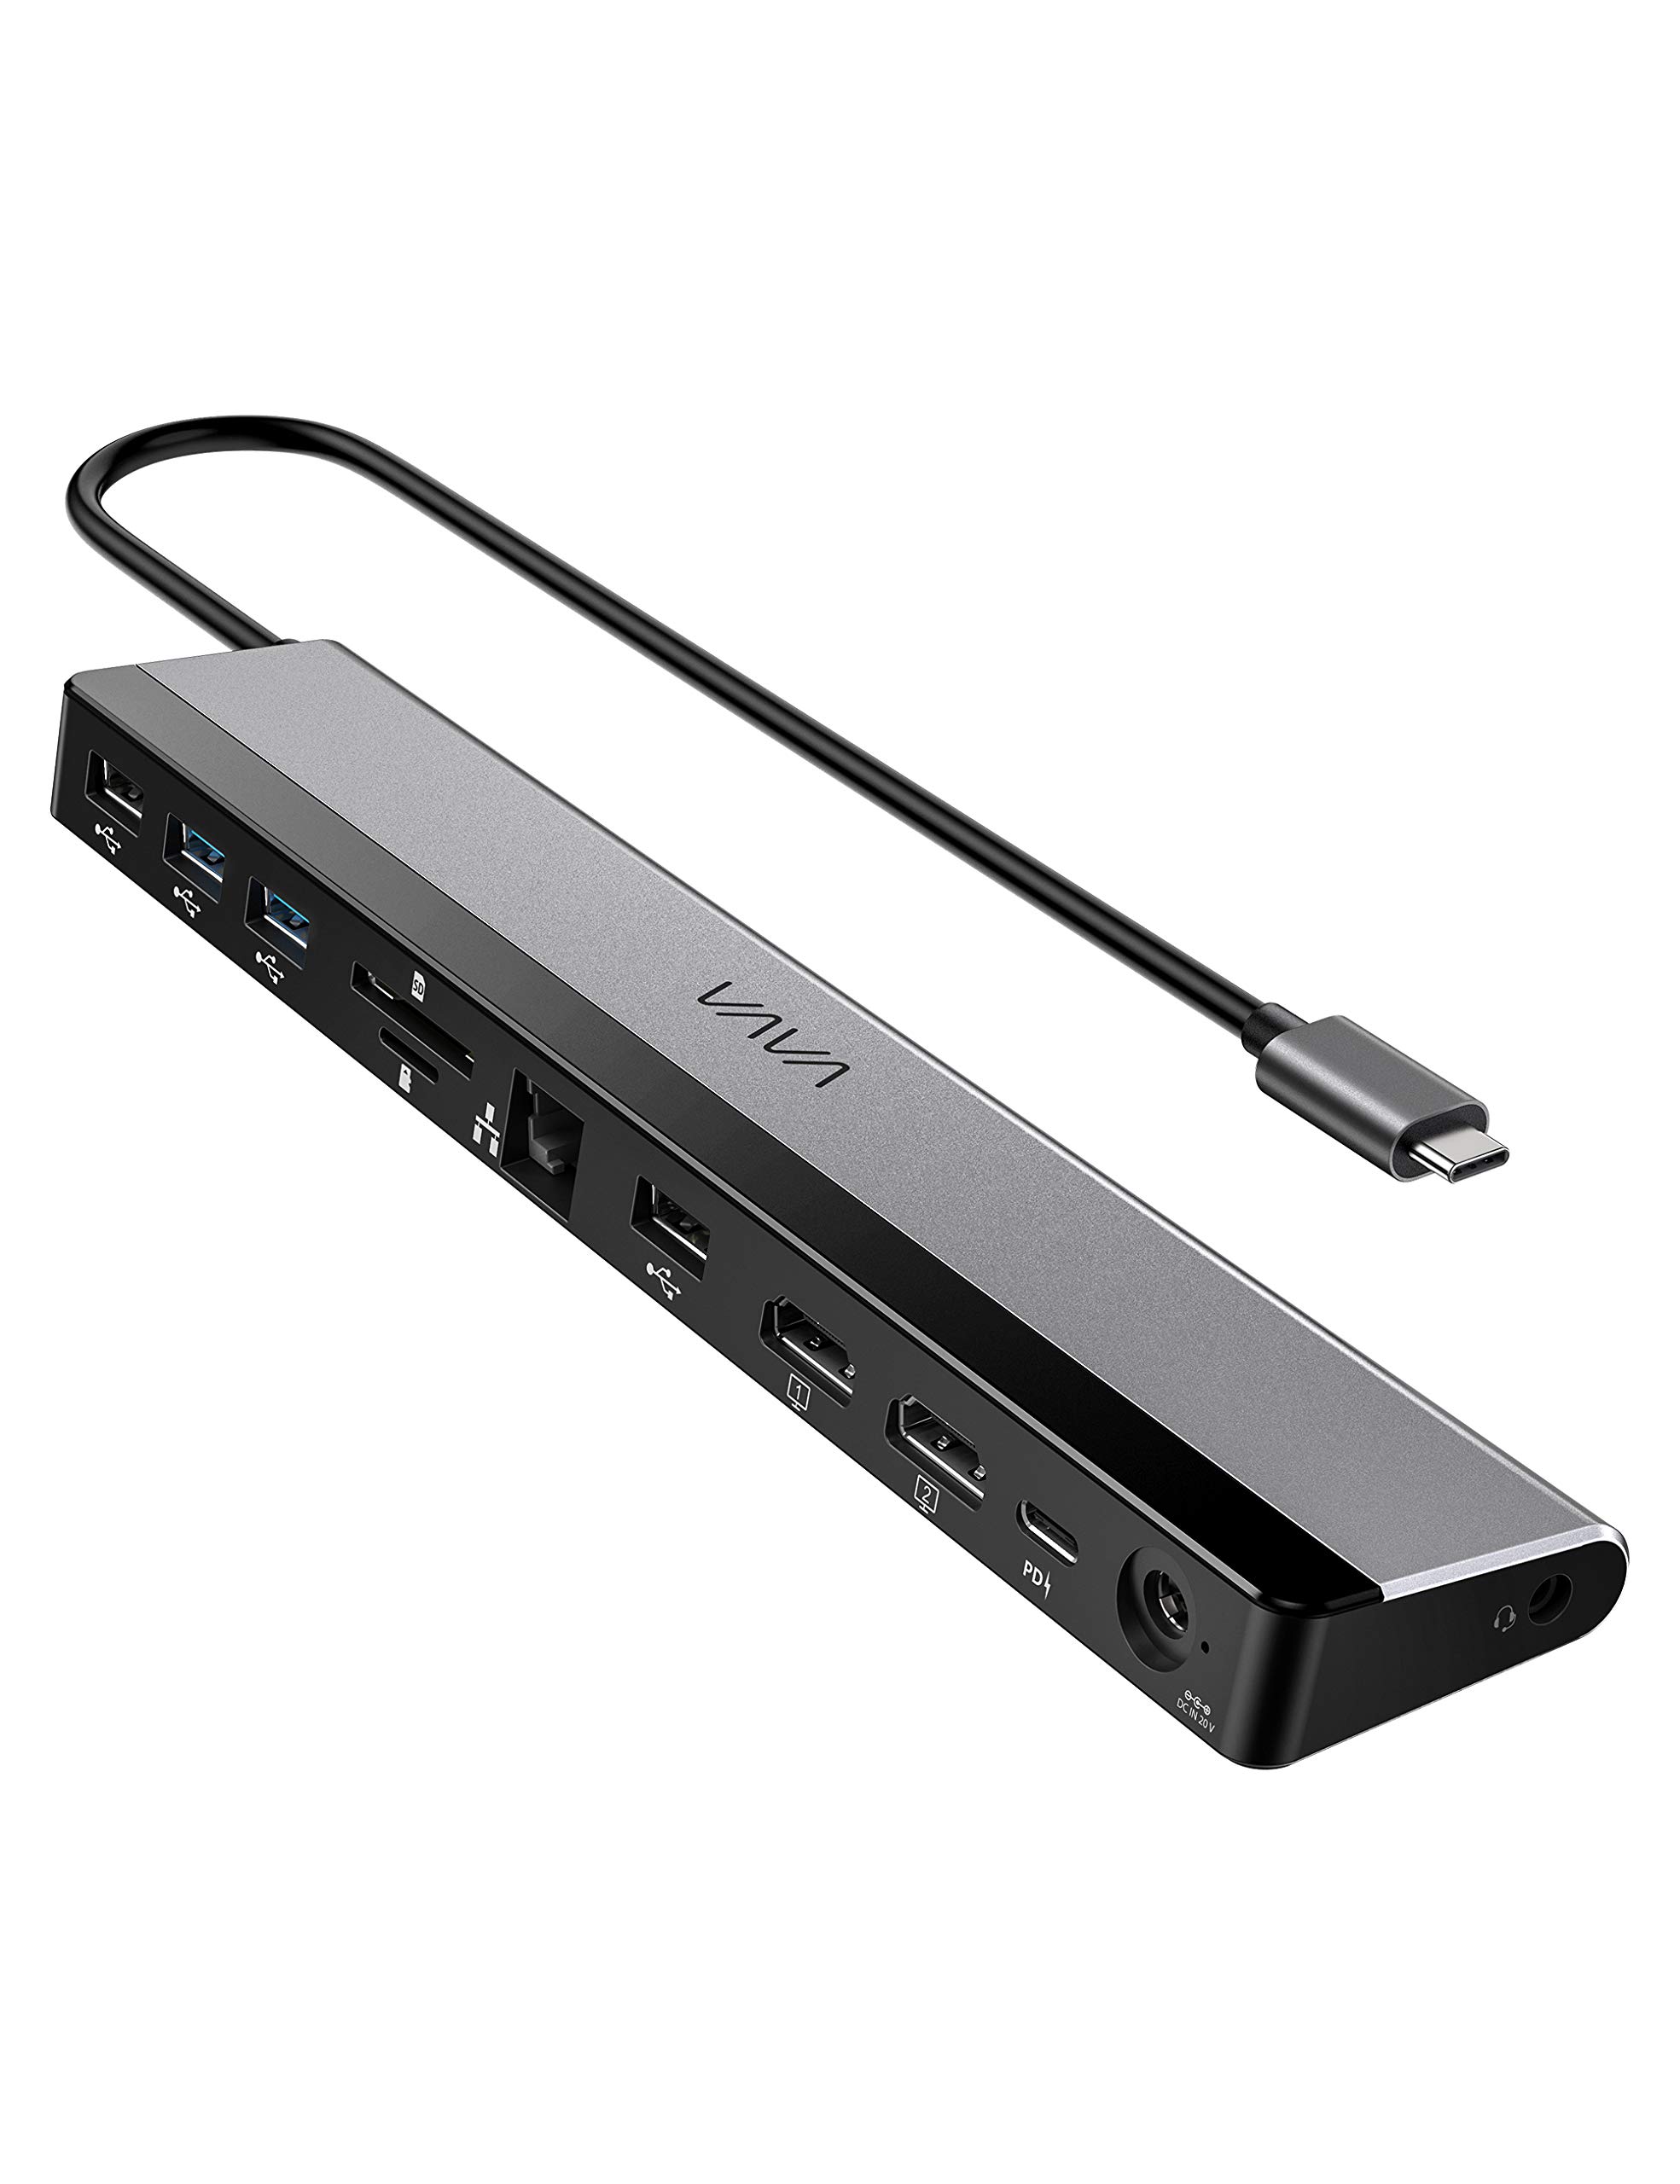 CNXUS USB C Docking Station, 12-in-1 Type C Hub with Dual 4K HDMI Ports, RJ45 Ethernet, 4 USB Ports, SD/TF Cards Reader, PD USB-C Charging Port, Audio/Mic for MacBook/Pro/Air, Type C Windows Laptops